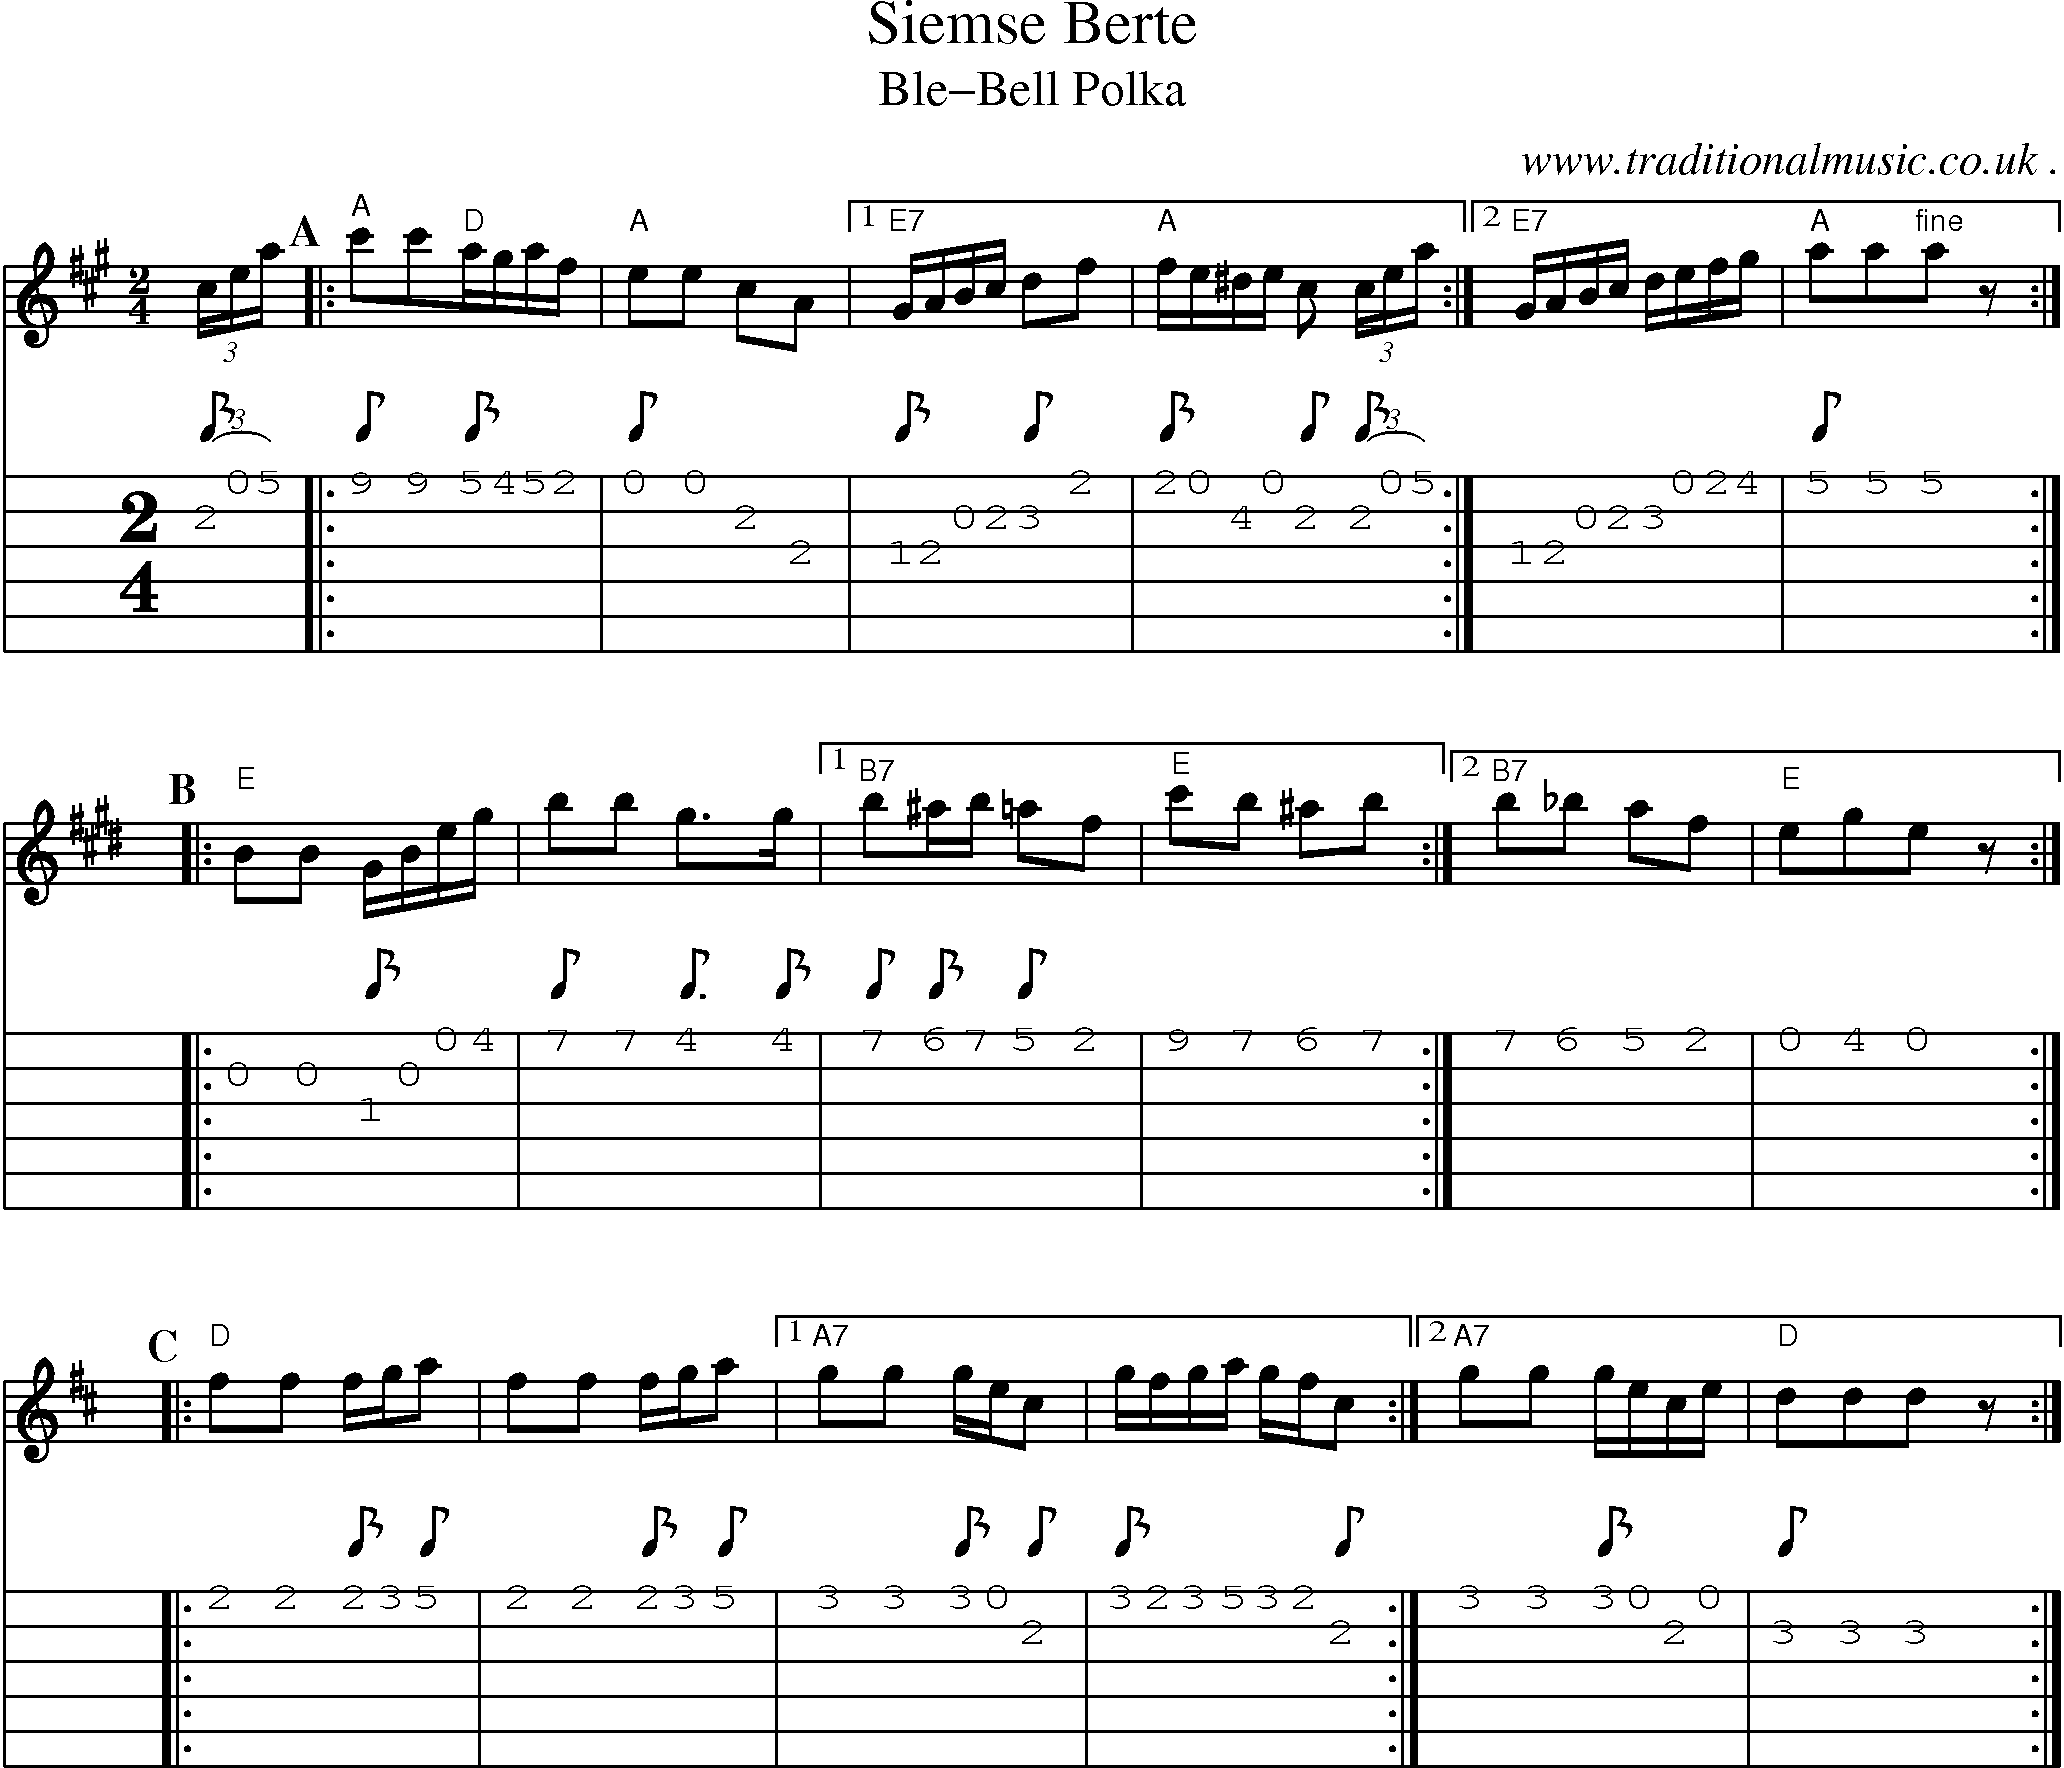 Sheet-Music and Guitar Tabs for Siemse Berte